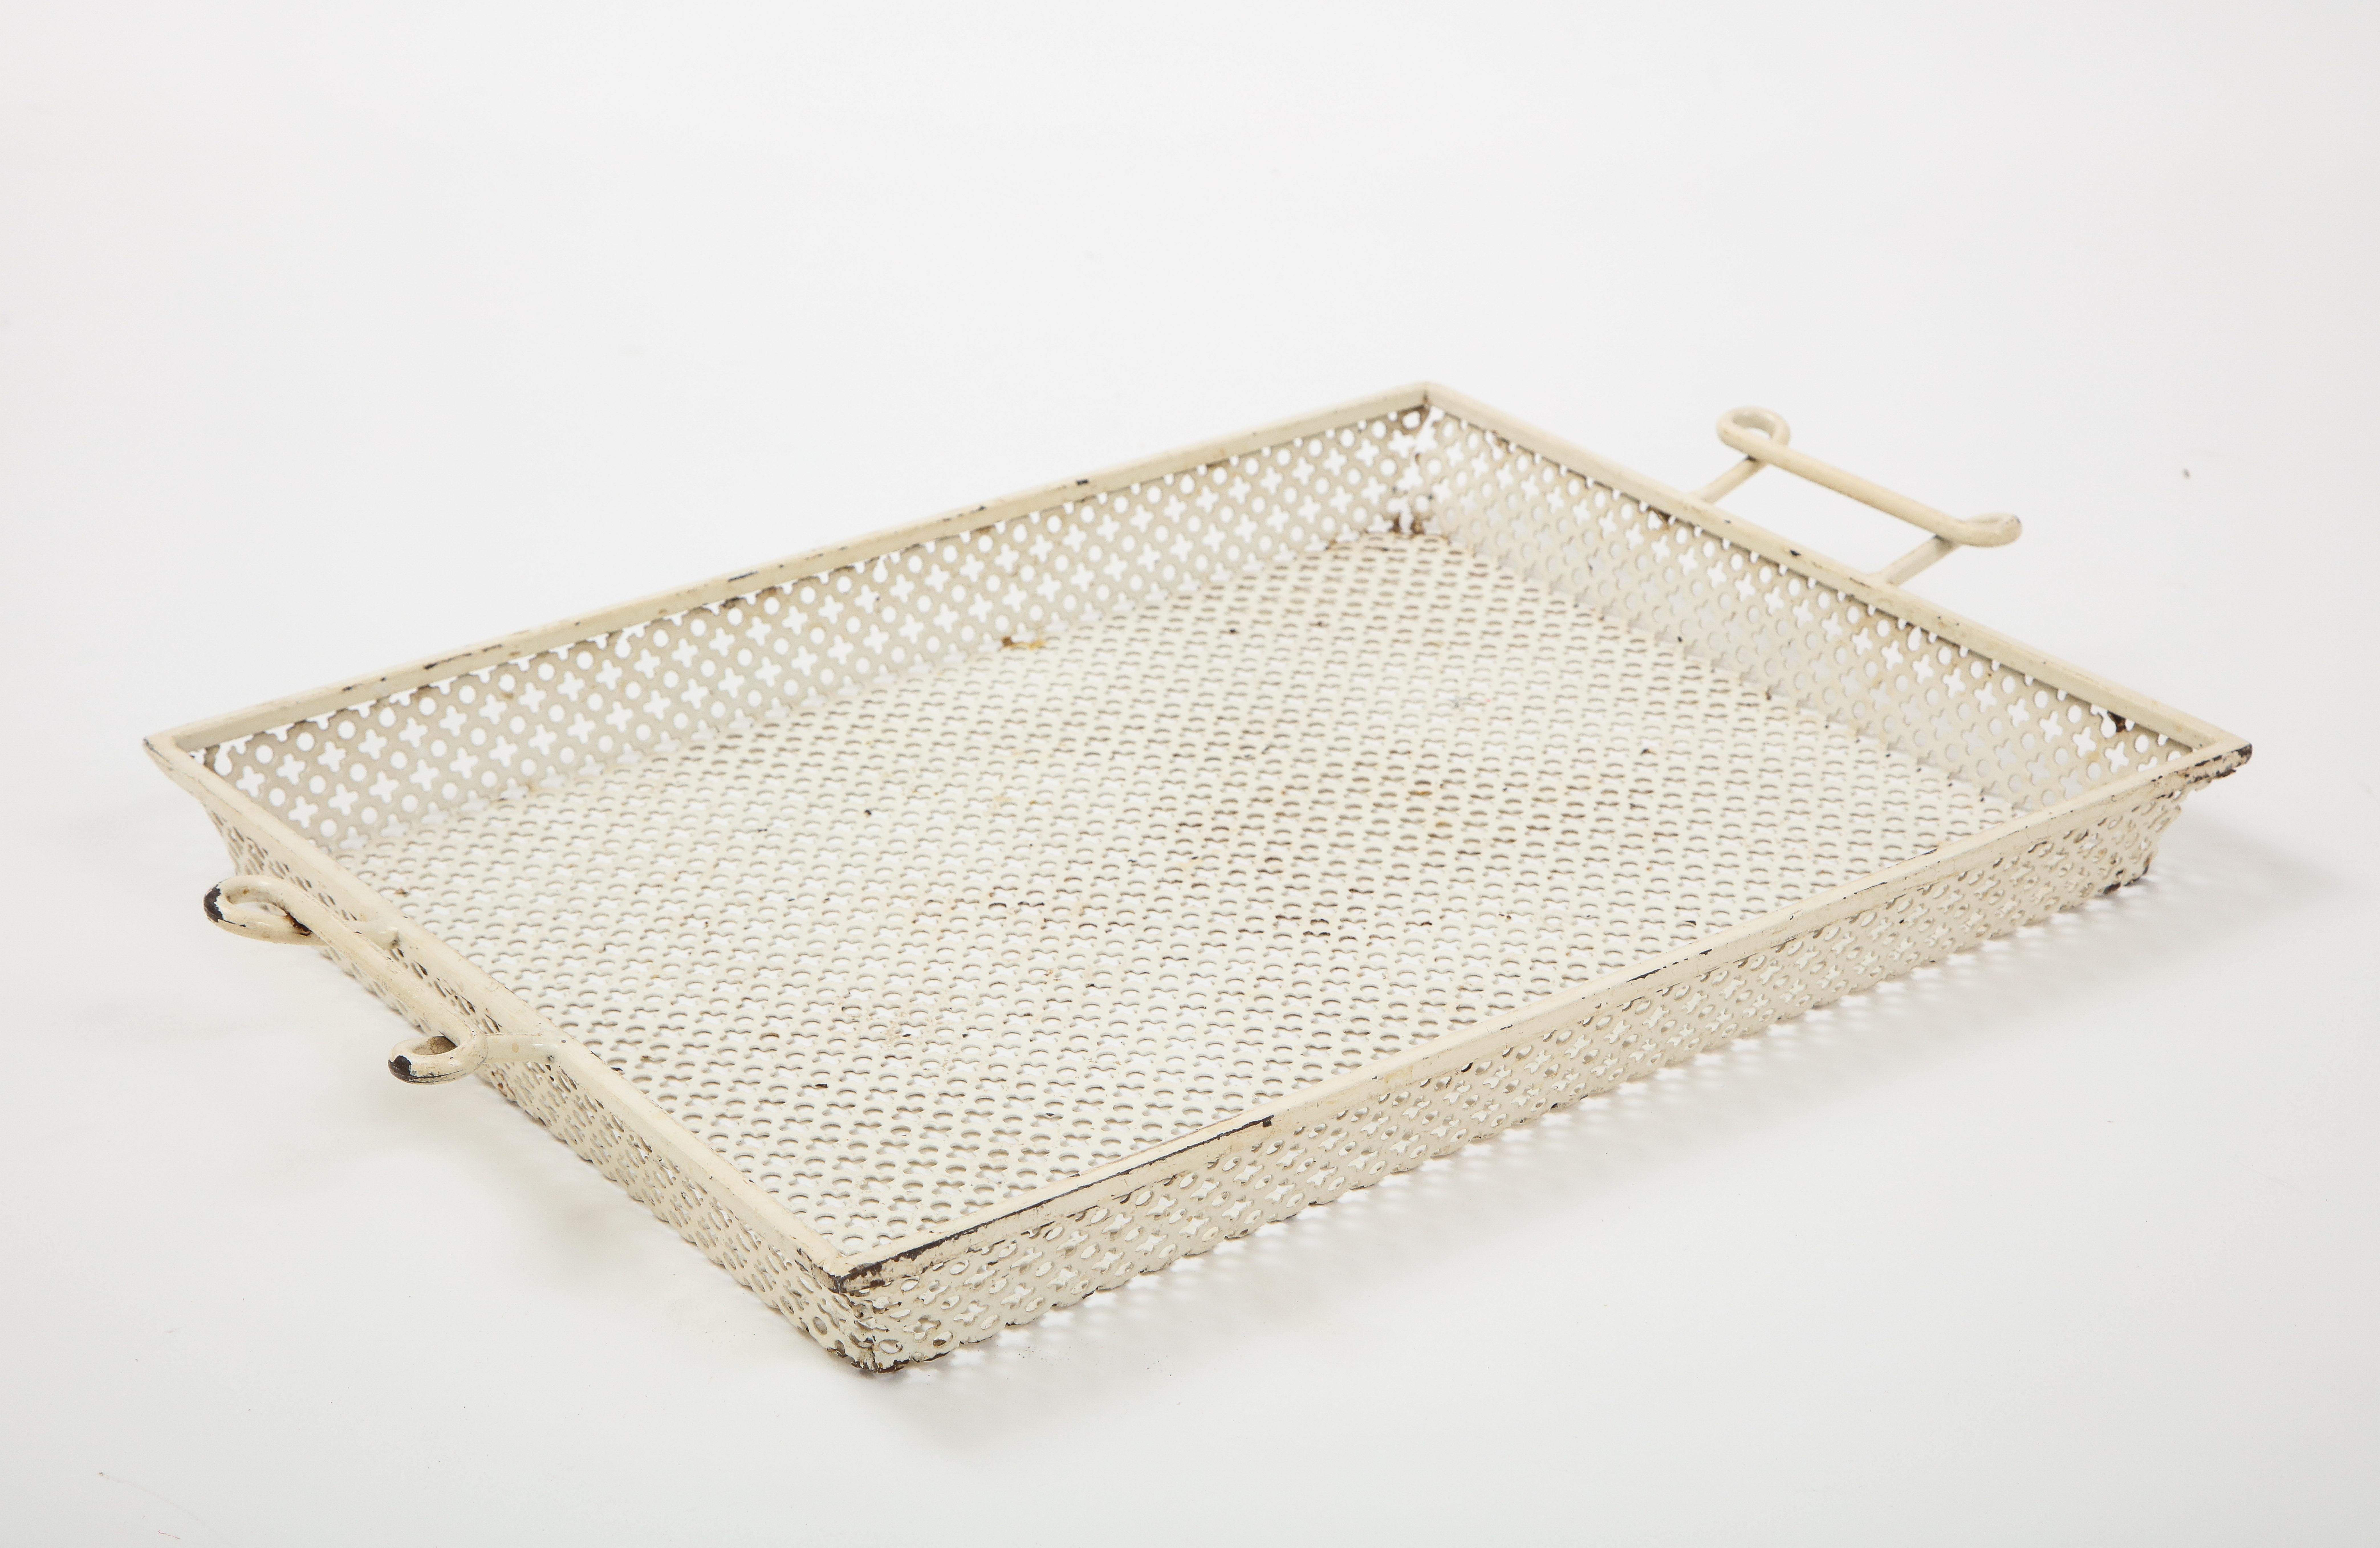 Mid-20th Century Mathieu Mategot White Lacquer Perforated Serving Tray, France, 1950